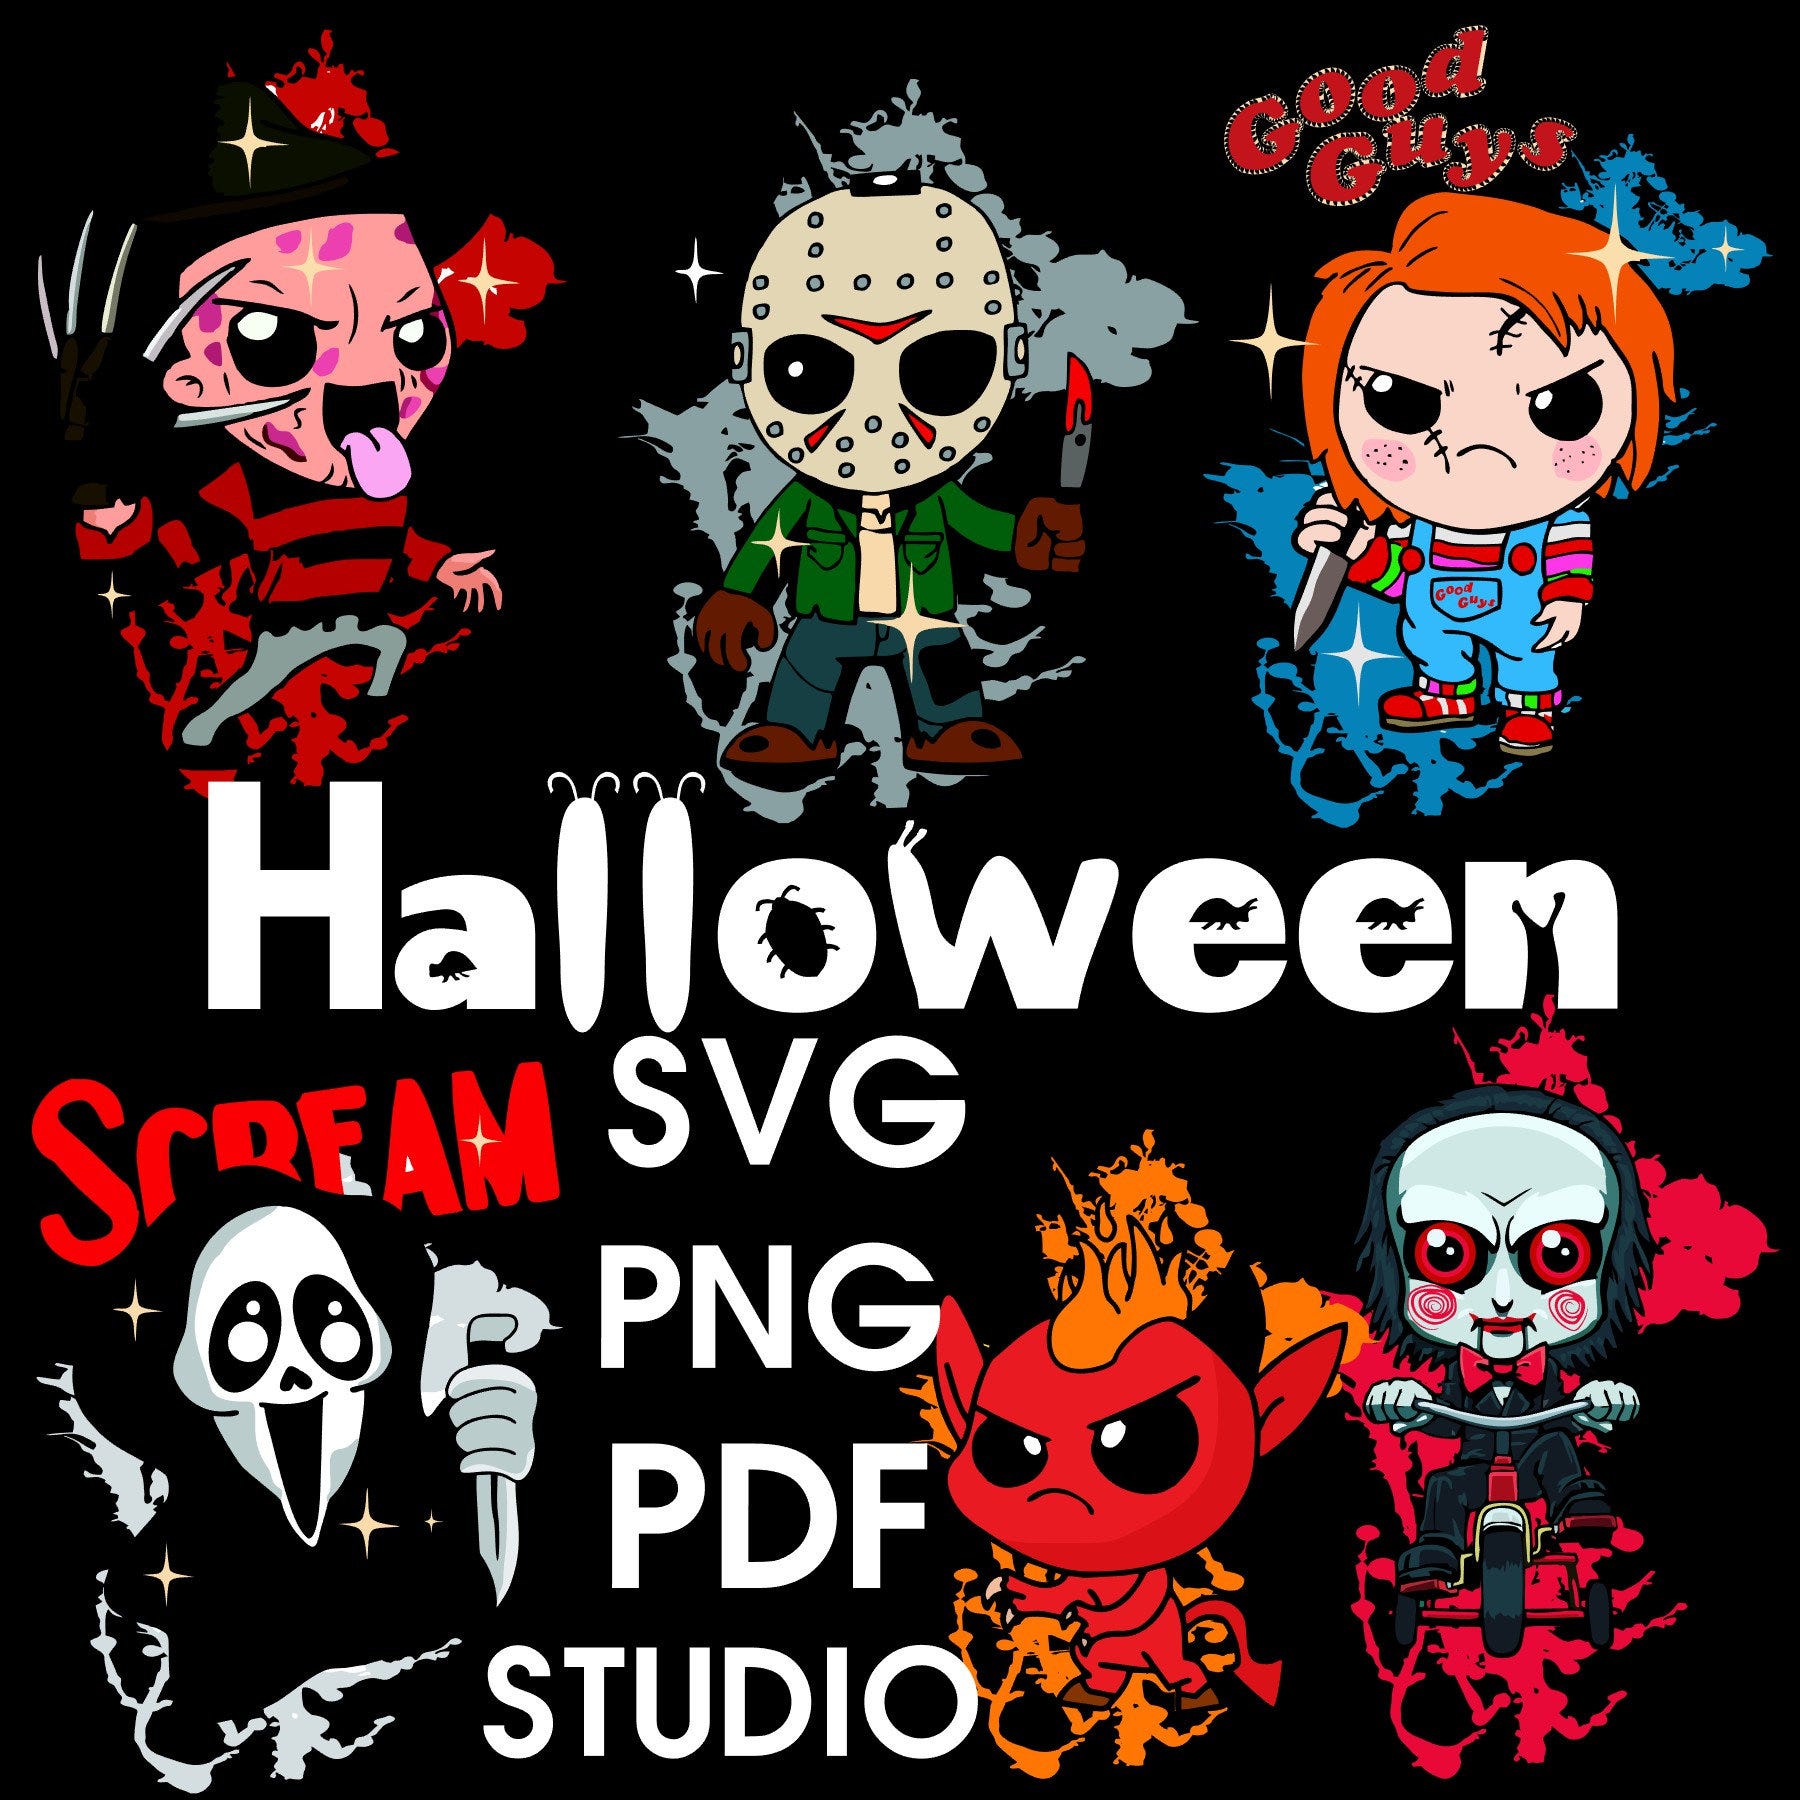 Bundle movie svg, File Characters,Halloween svg, Halloween cricut, Silhouette Cameo, SVG, PNG, PDF 15 personajes